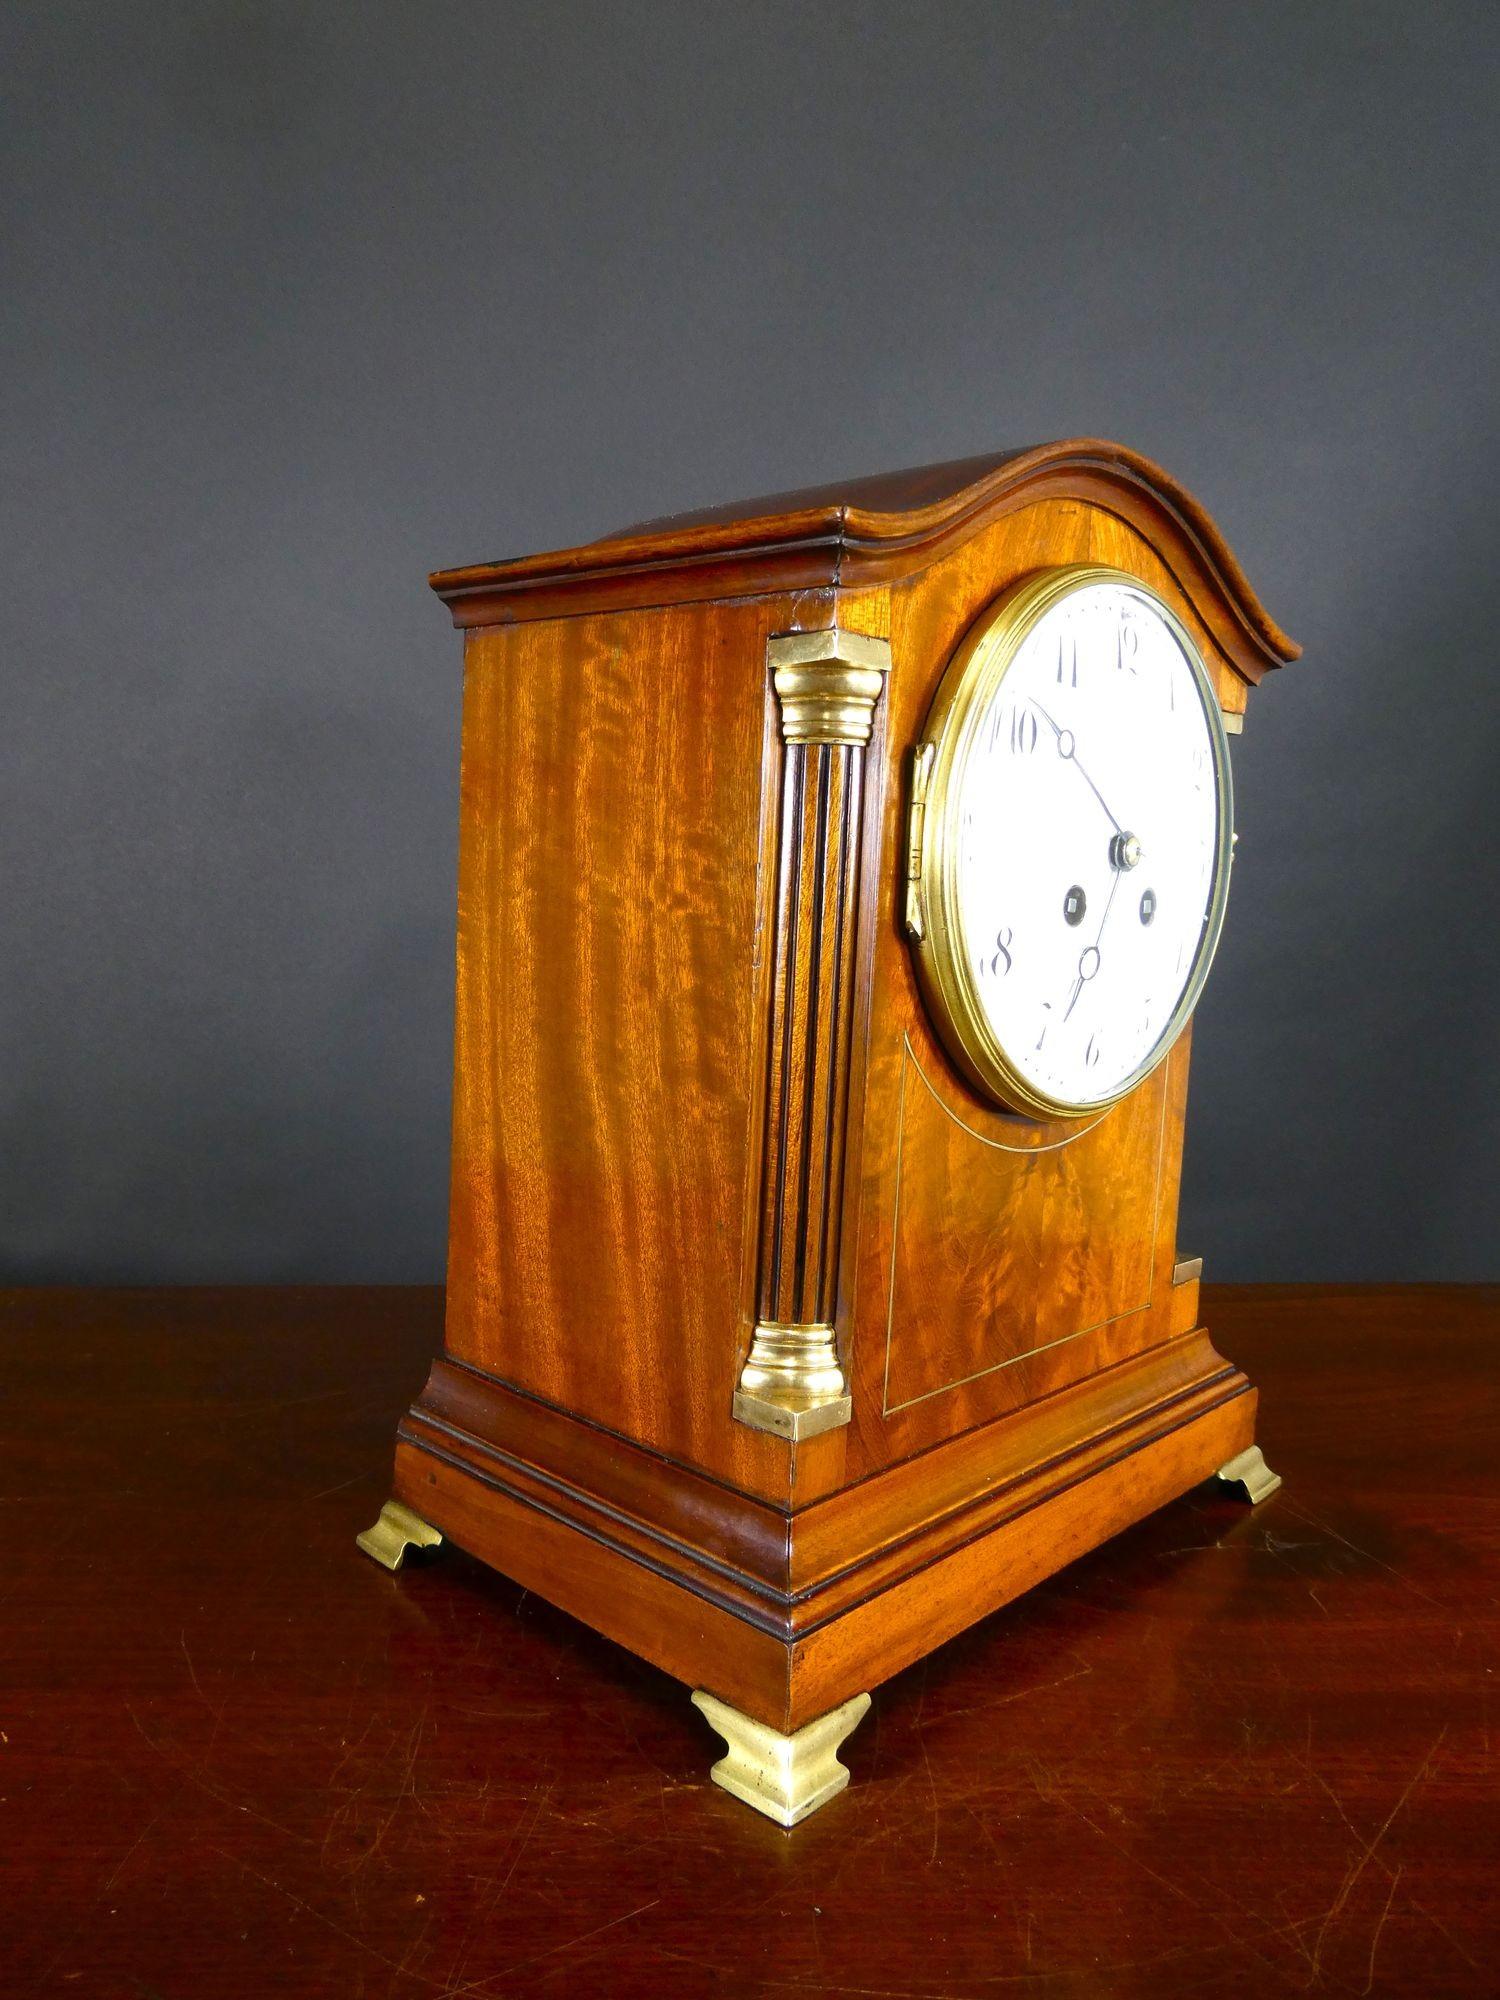 Victorian Mahogany French Mantel Clock

Victorian mantel clock housed in a flame mahogany case with serpentine shaped top, reeded pillars with brass capitals and brass line inlay decoration to the front. Moulded stepped plinth resting on four brass